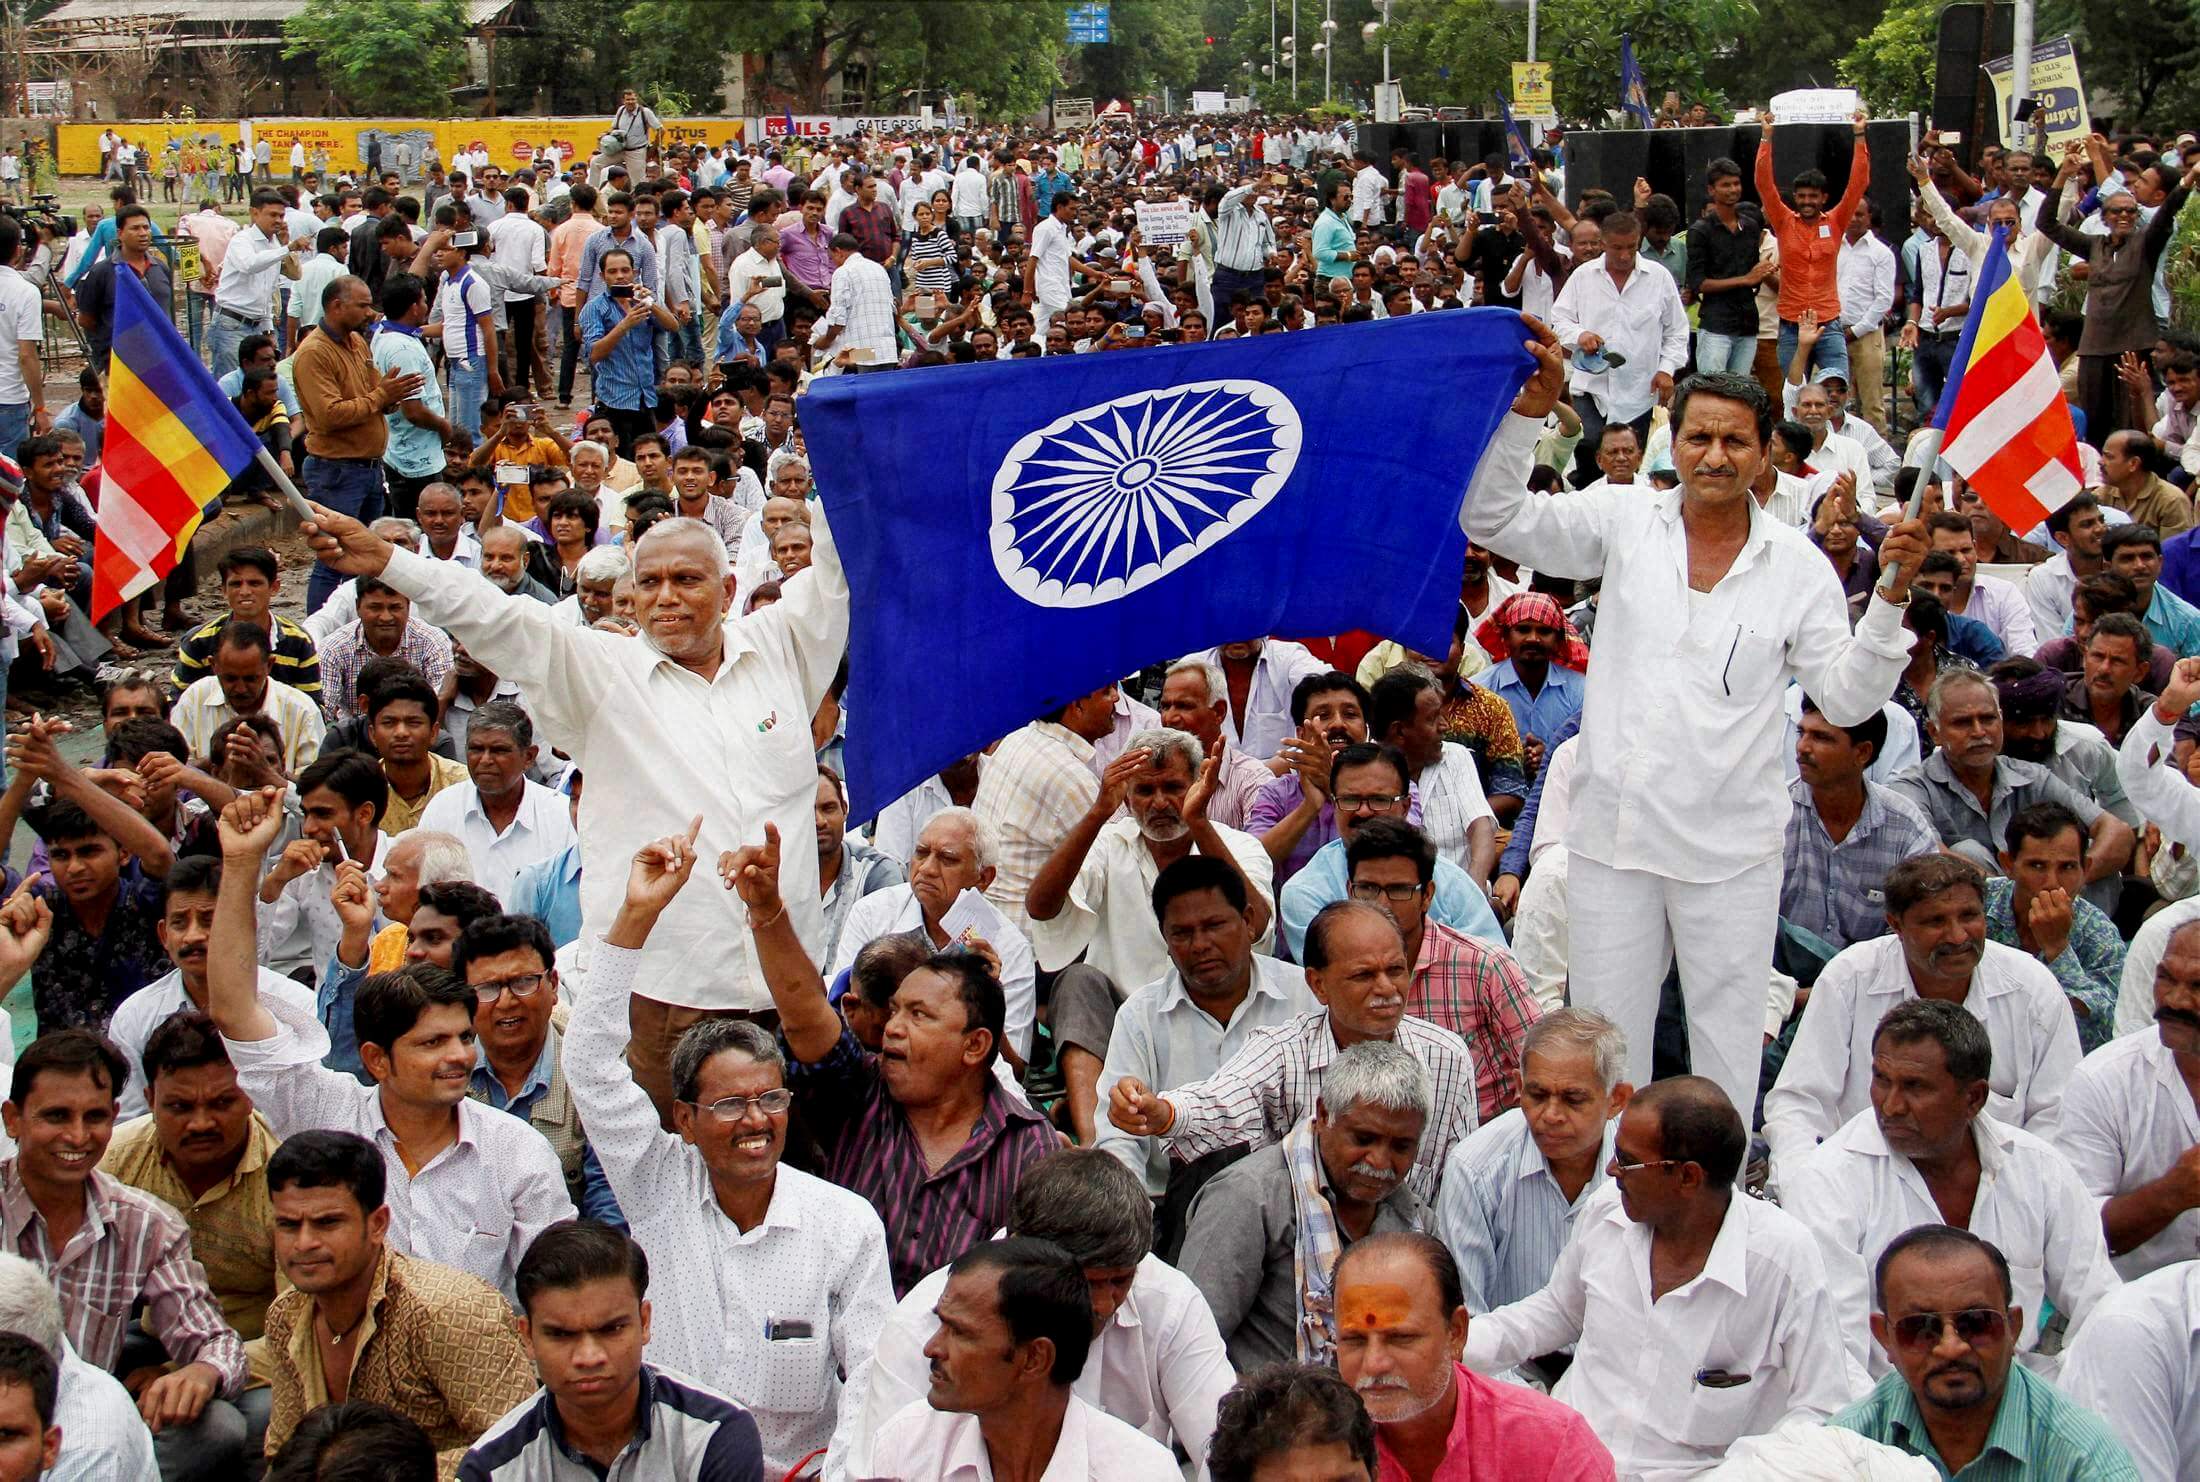 Dalits Organise A Mega Move Against Atrocities In Gujarat Vow Not To Dead Cattle